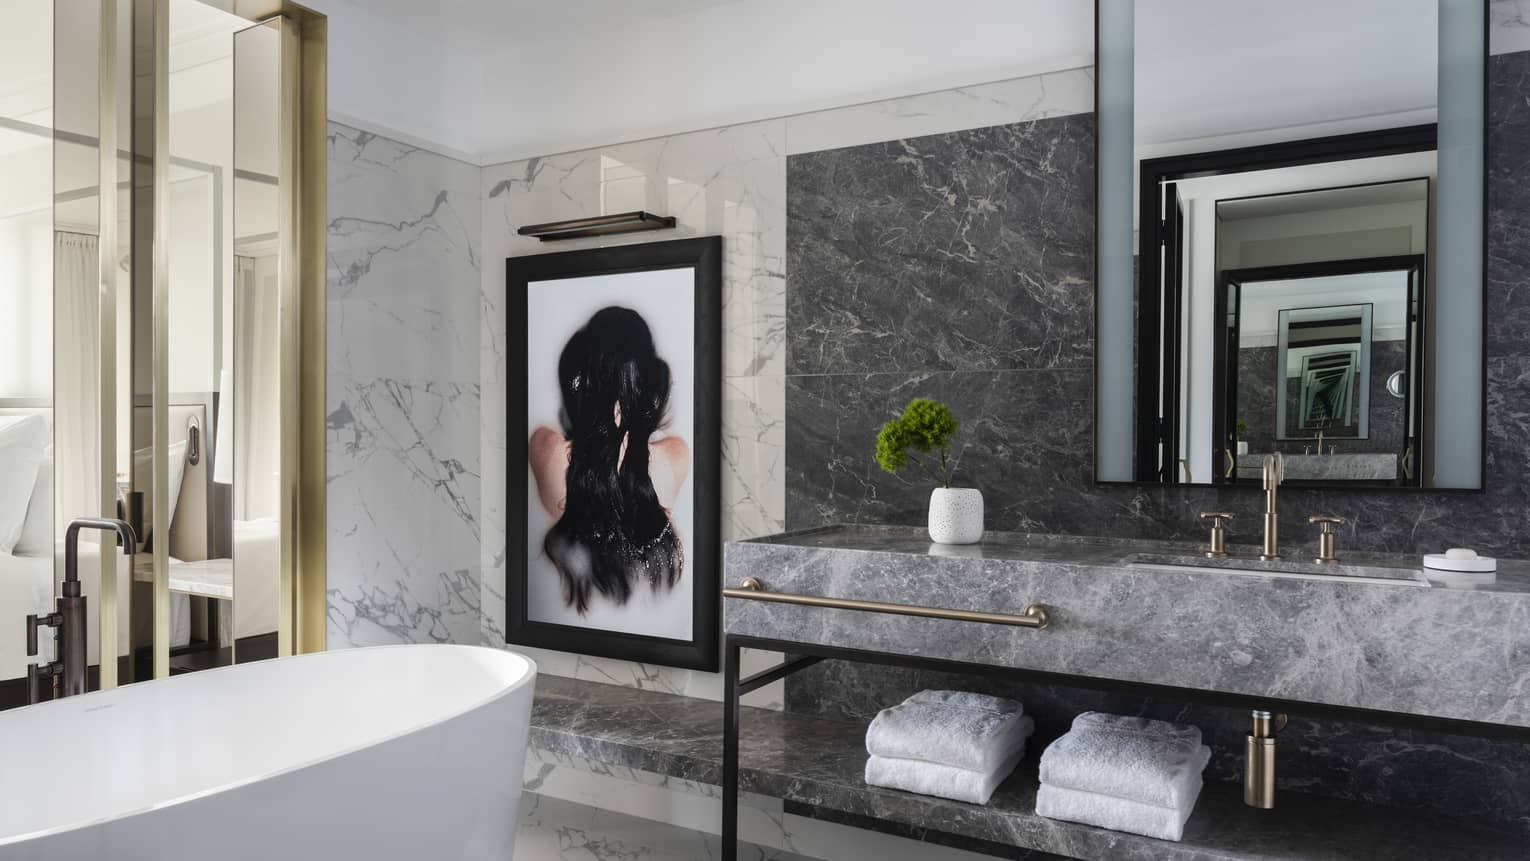 A free-standing tub, grey marble vanity and a framed work of art are set beside glass doors that open to the bedroom